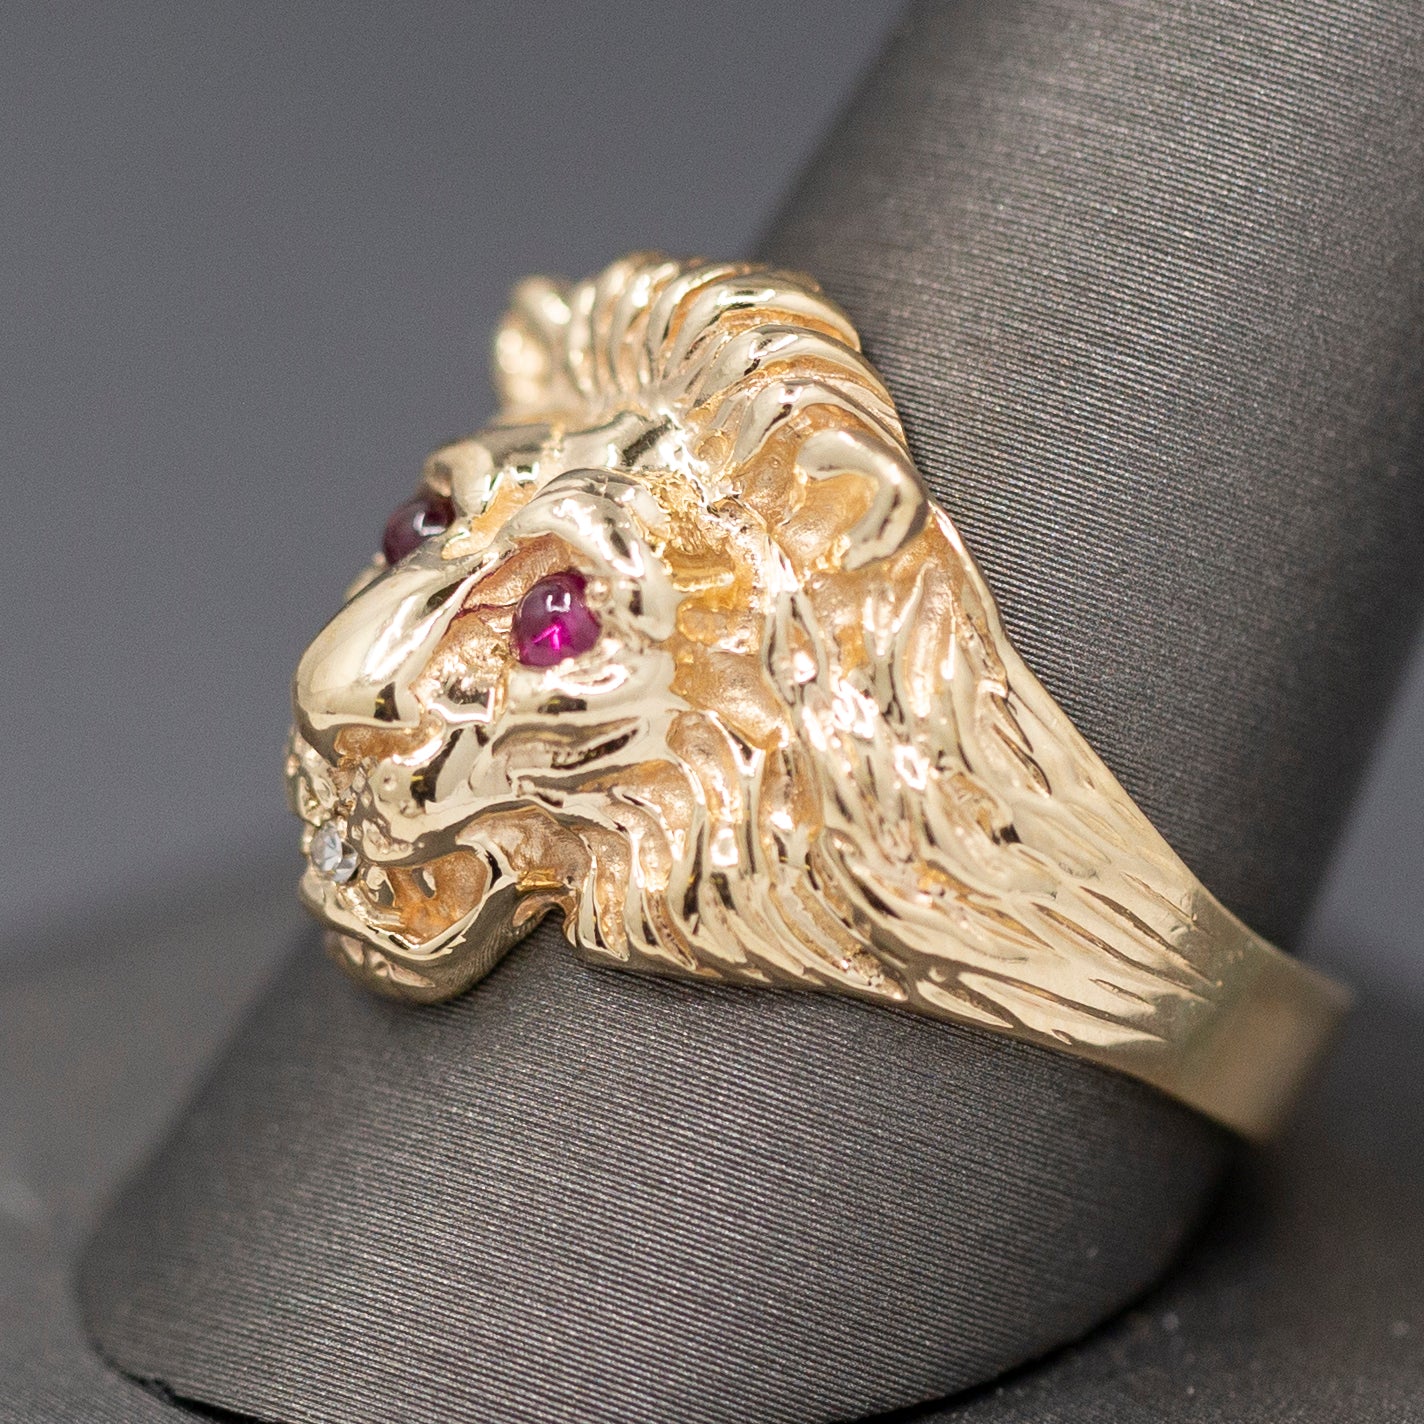 Vintage Lion Head Ring with Ruby Eyes and Diamond in Mouth in 14k Yellow Gold